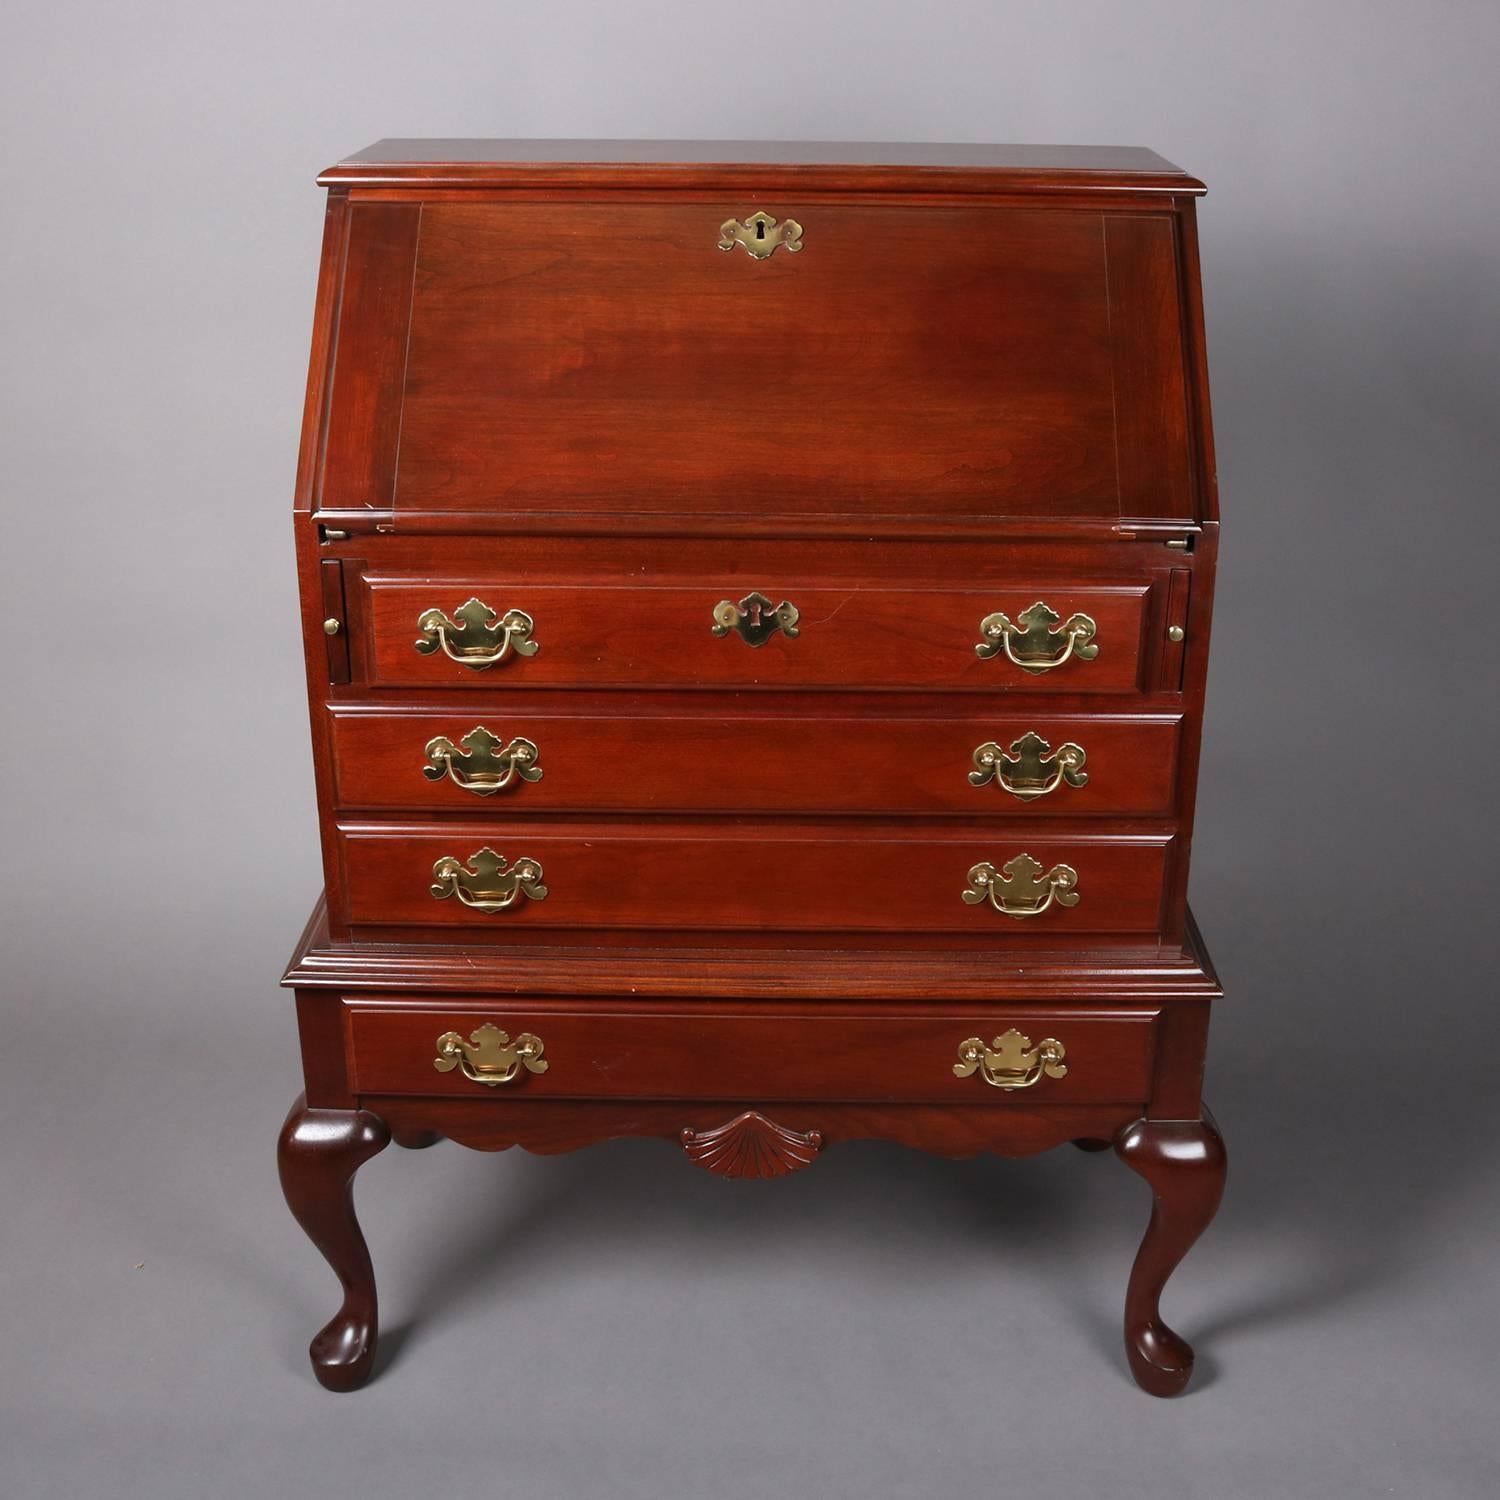 Vintage Queen Anne Baker style secretary by The Colonial Furniture Company features cherry construction with drop front writing surface opening to interior pigeon holes and storage compartments, four drawers, seated on cabriole legs, and having